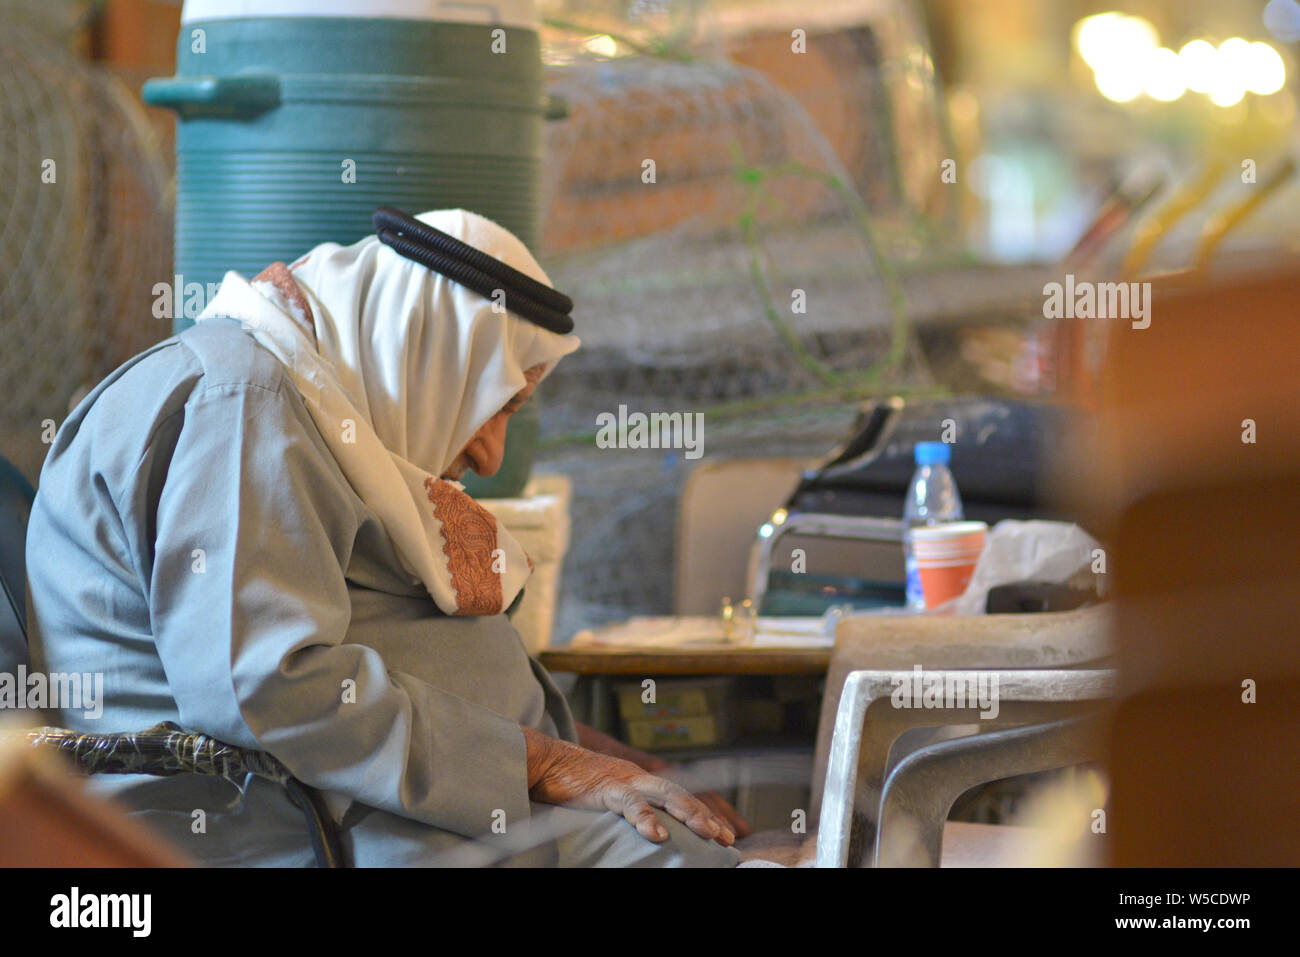 DOHA, QATAR - FEBRUARY 27, 2016: An old qatari man felt asleep, sitting at a table of a cafe in Souq Wakif. Taken at night with no flash. Stock Photo